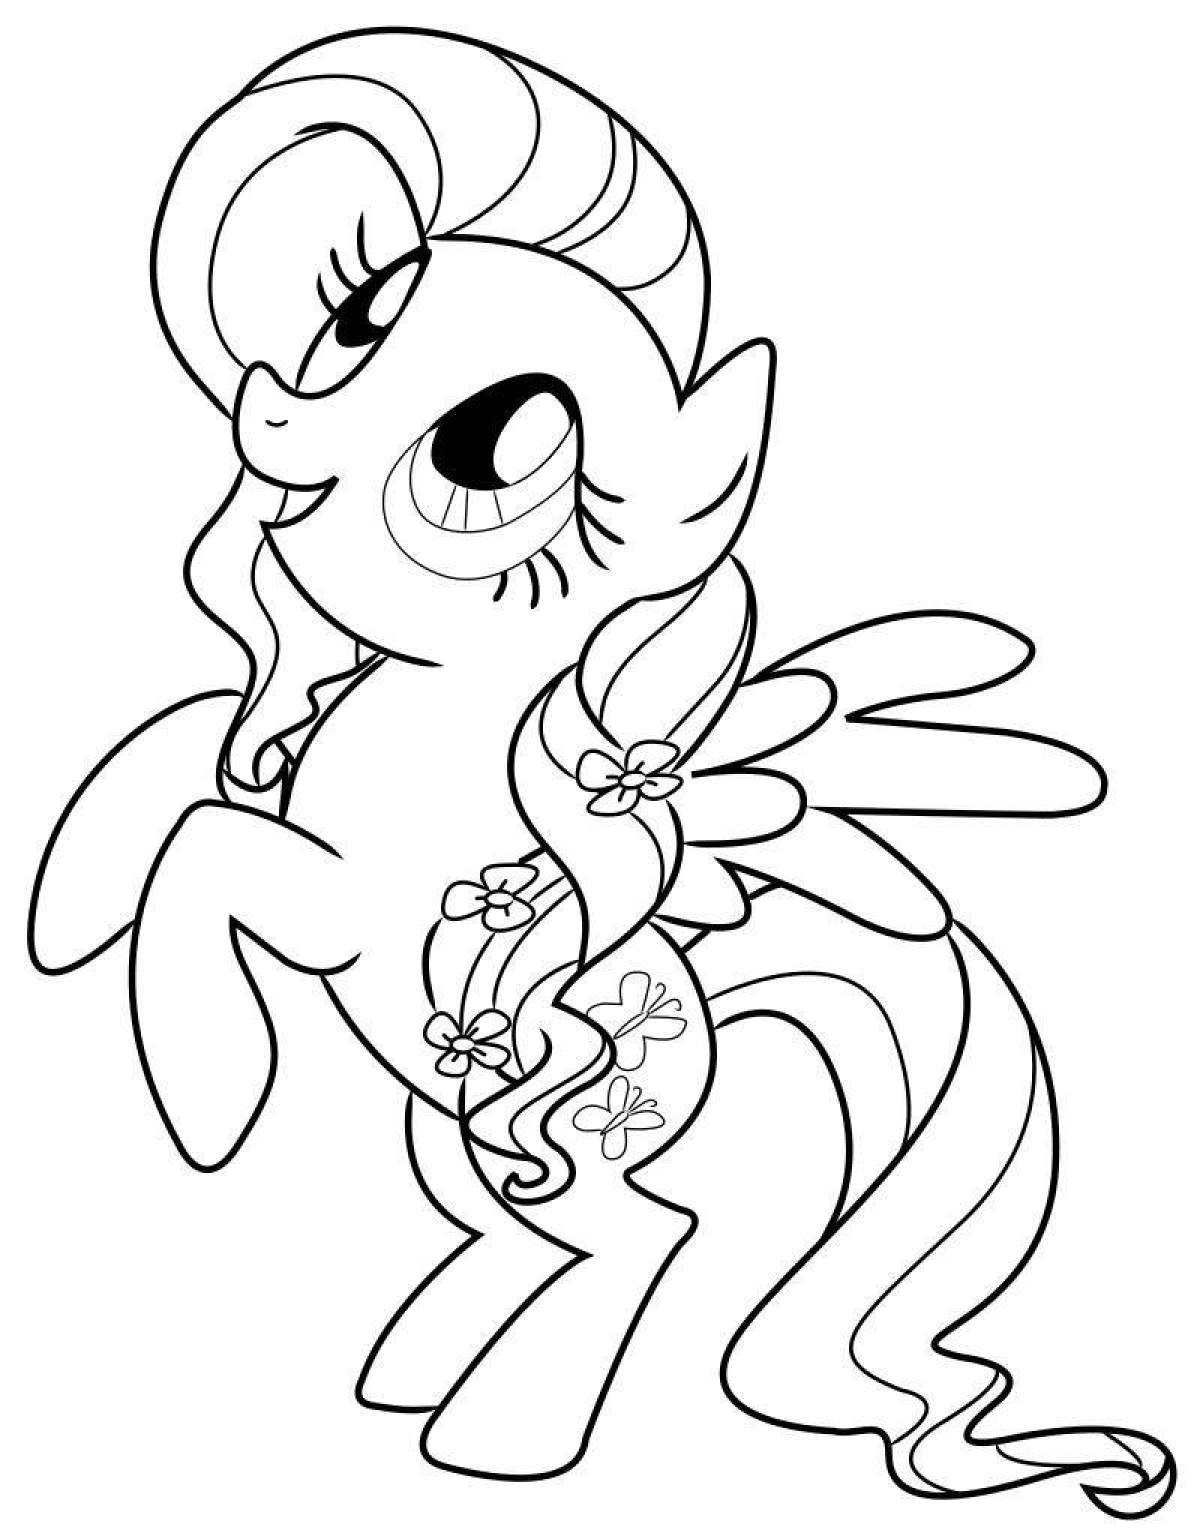 Playtime fluttershy pony coloring page